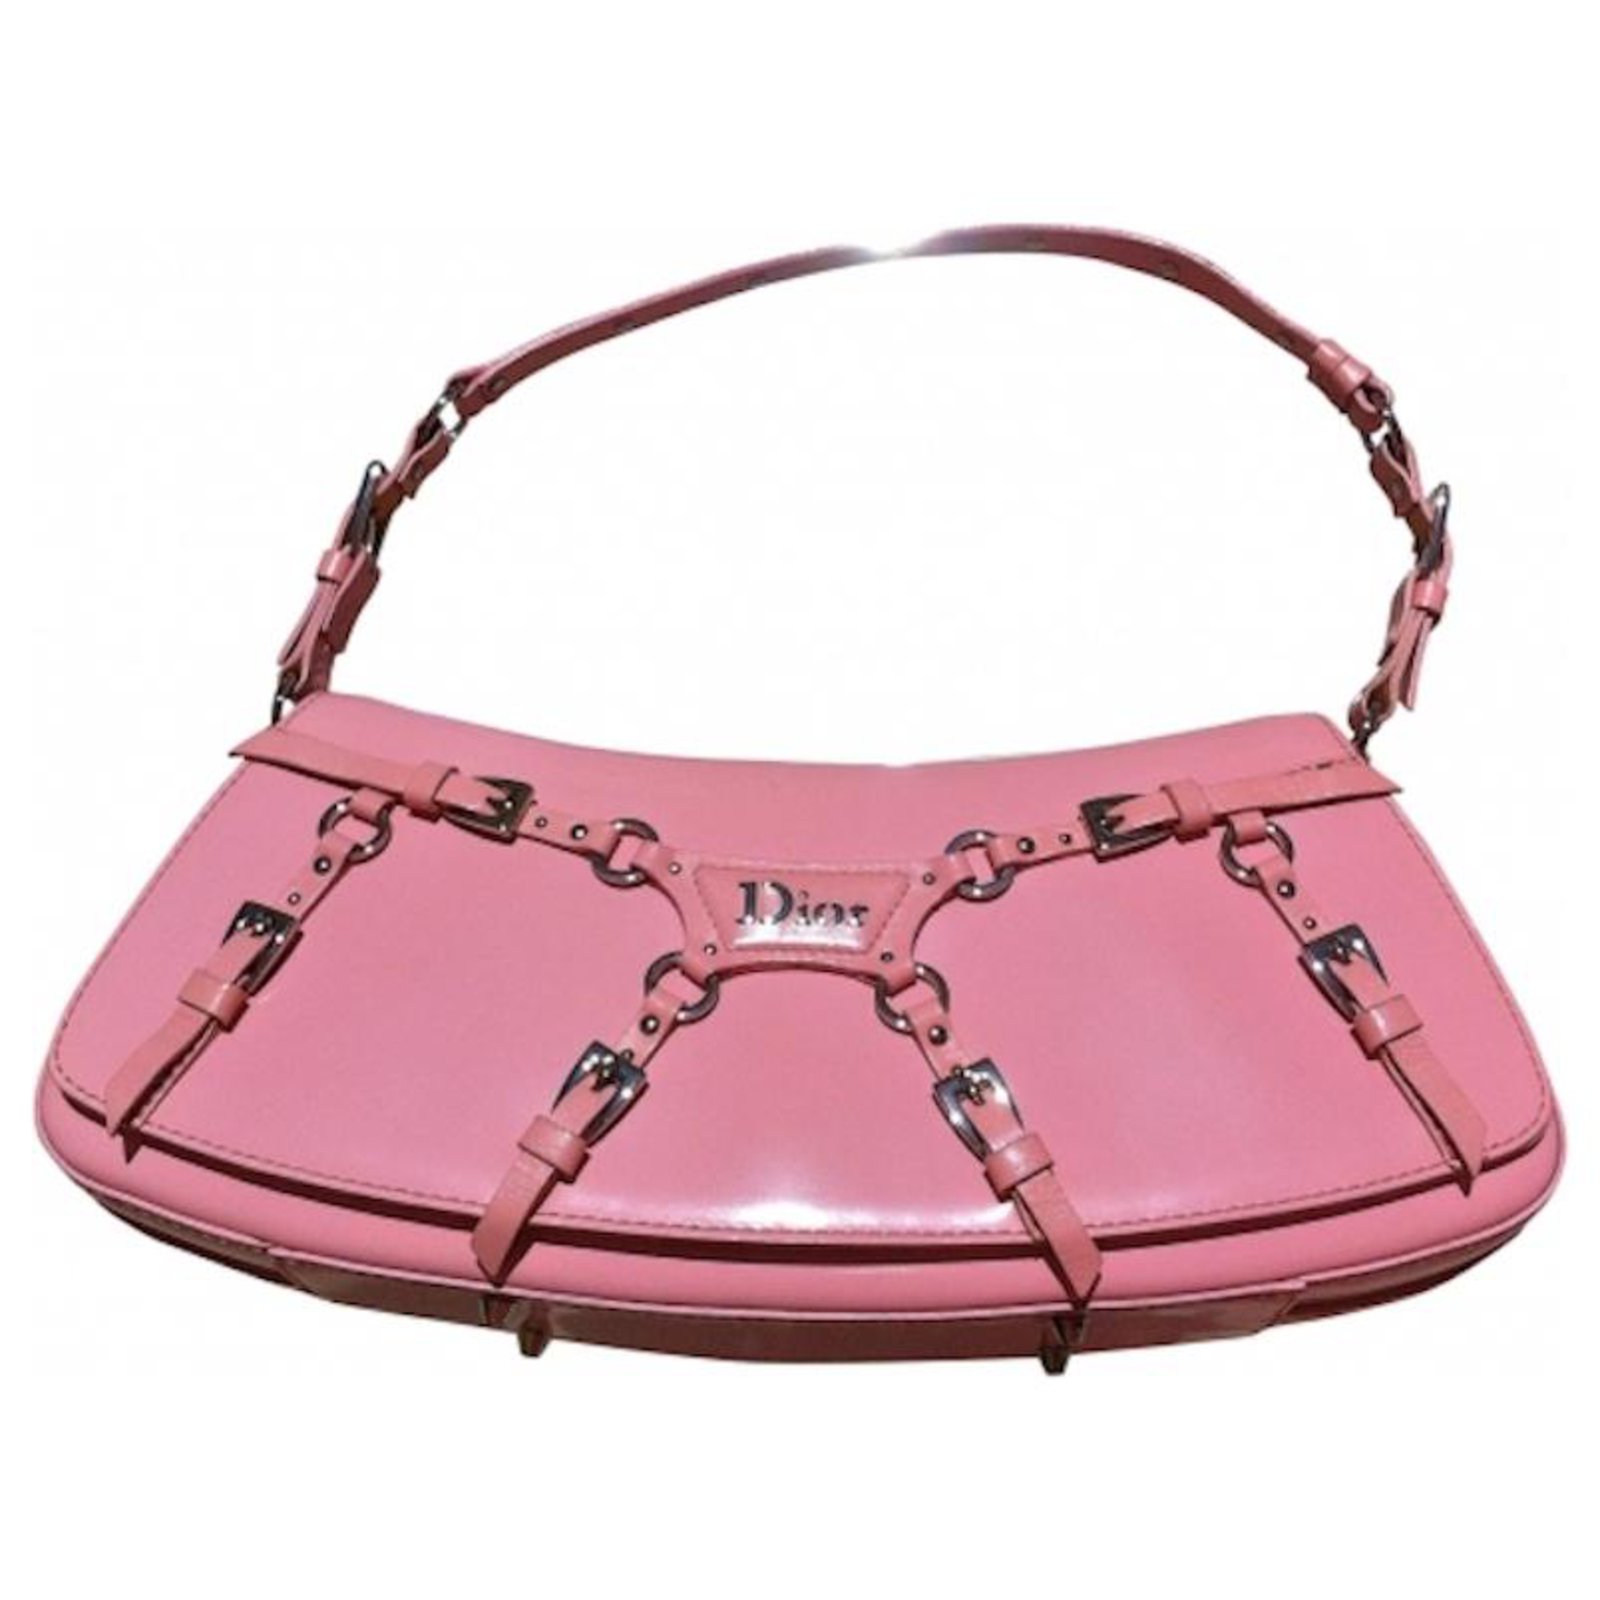 Lady dior leather handbag Dior Pink in Leather - 32716403